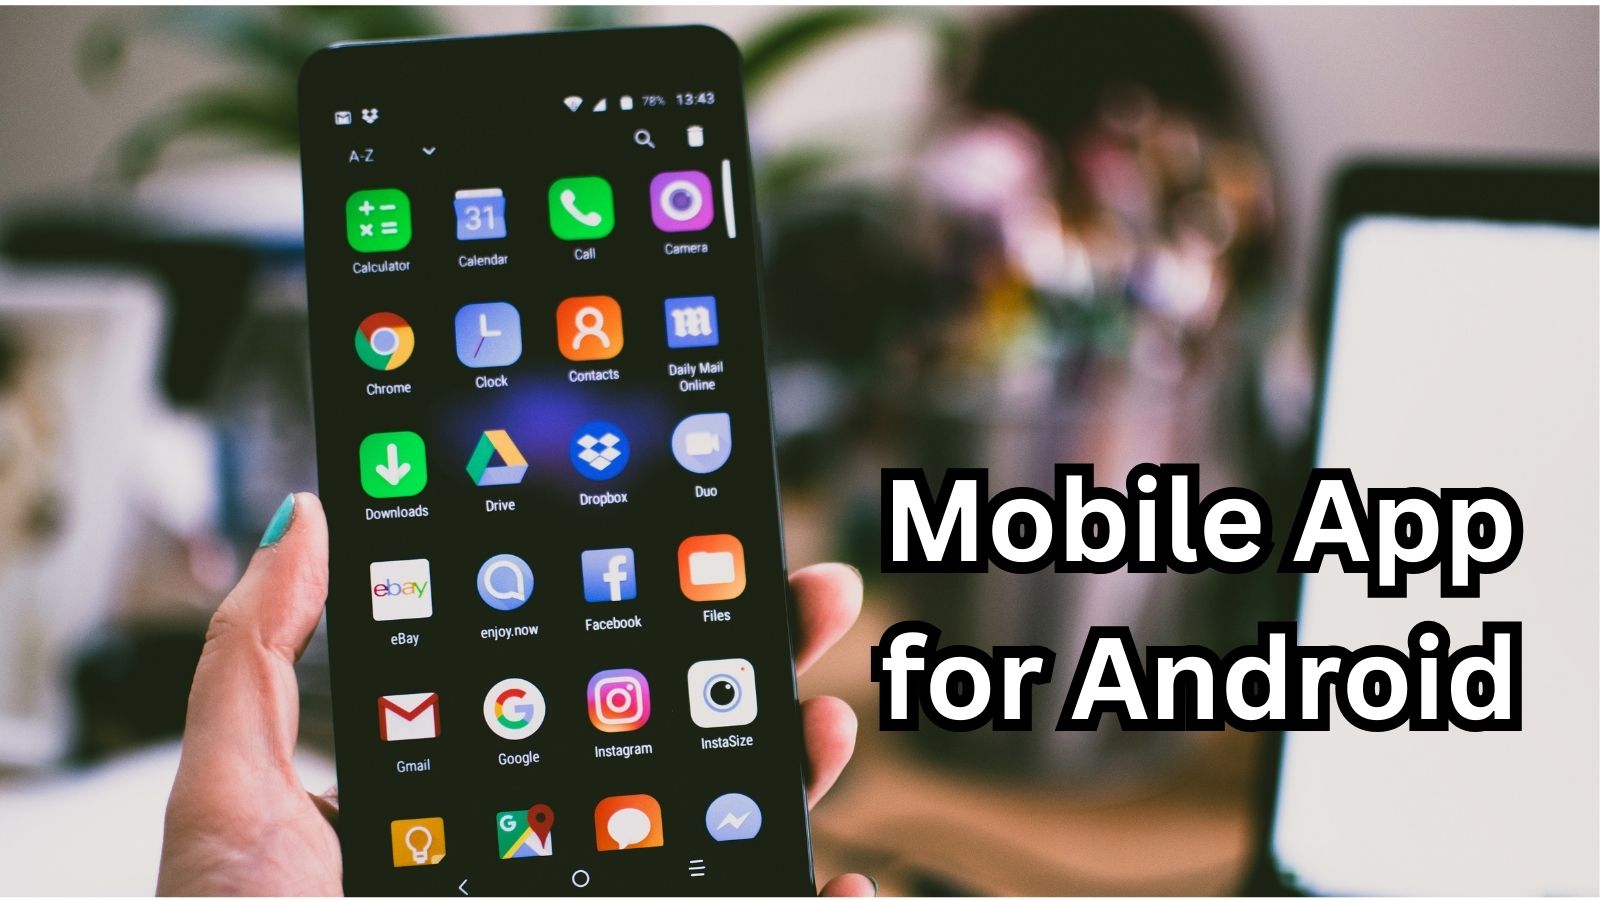 How to Develop a Mobile App for Android?: A Step-by-Step Guide